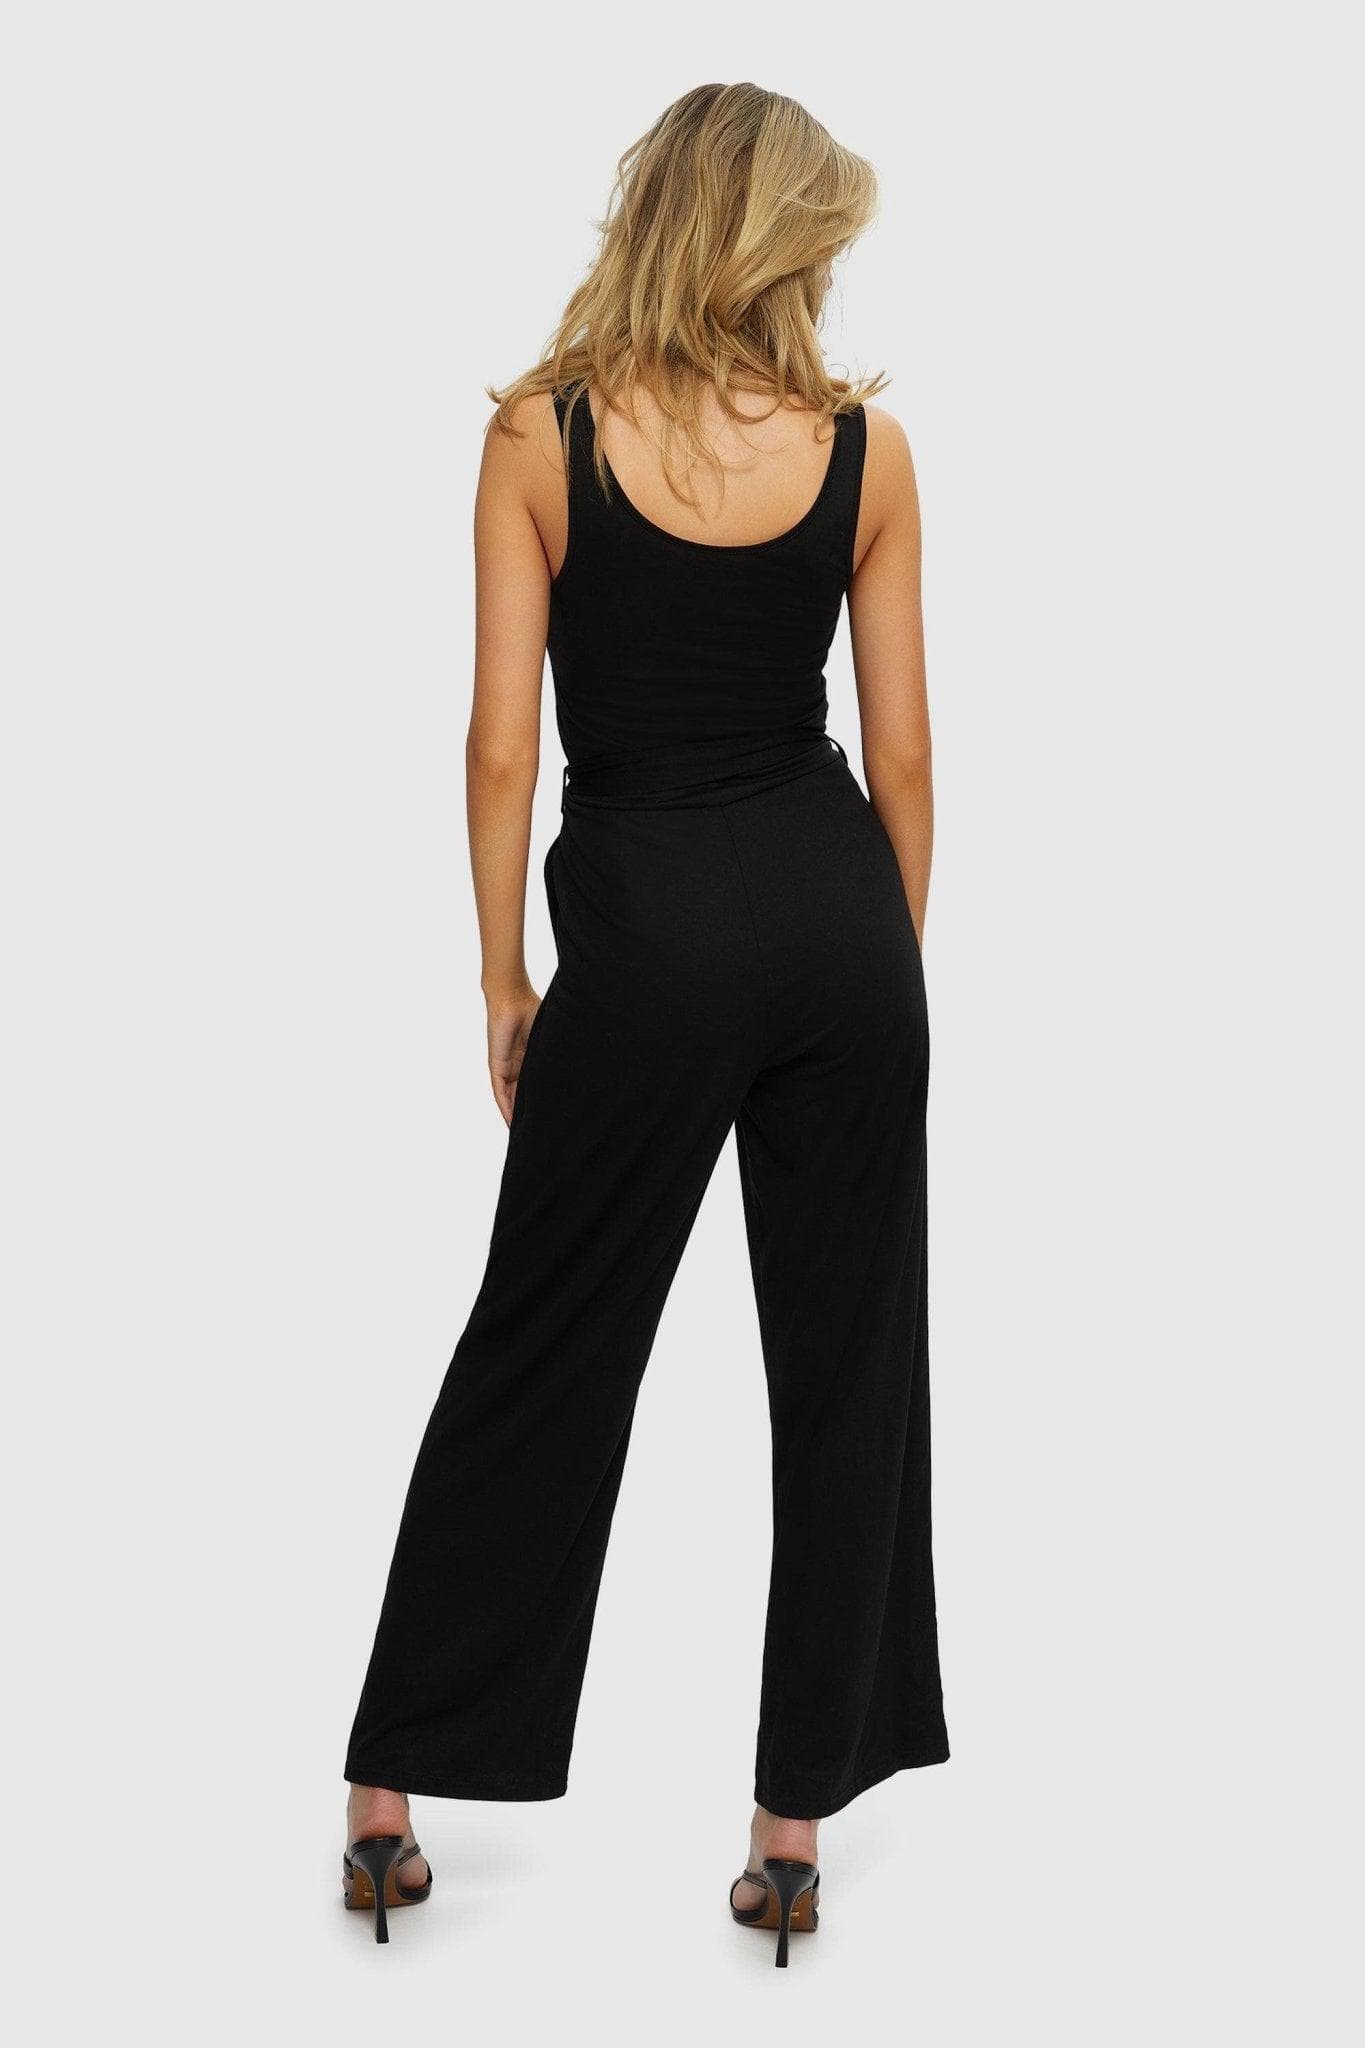 Time and Tru Hacci Pull On Wide Leg Pants, Black Women's Size XL New